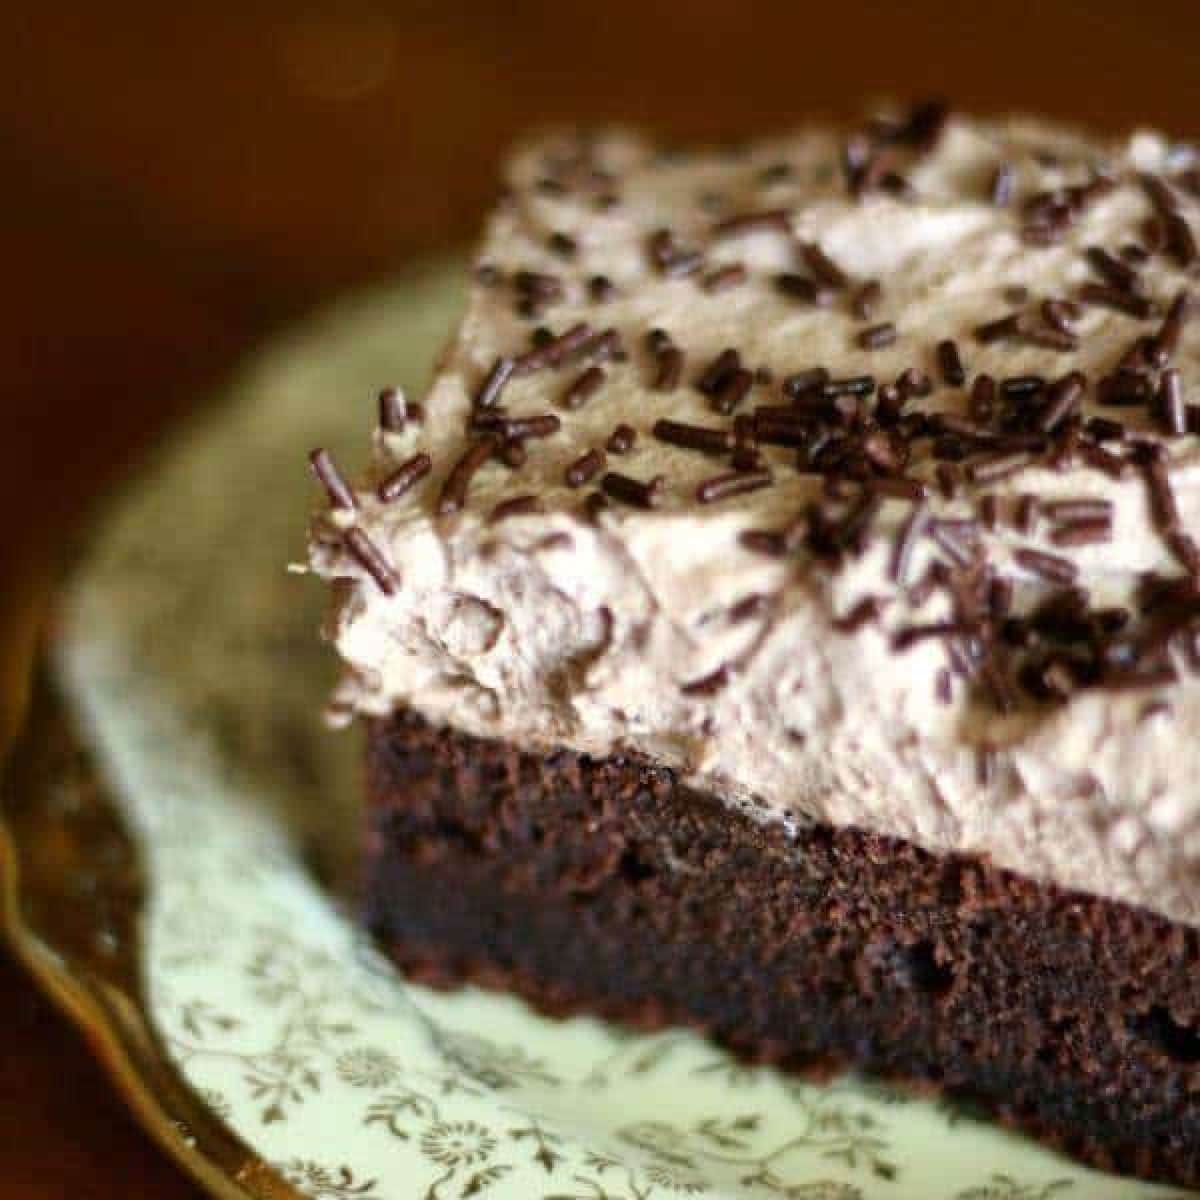 Square serving of chocolate sheet cake with whipped icing.